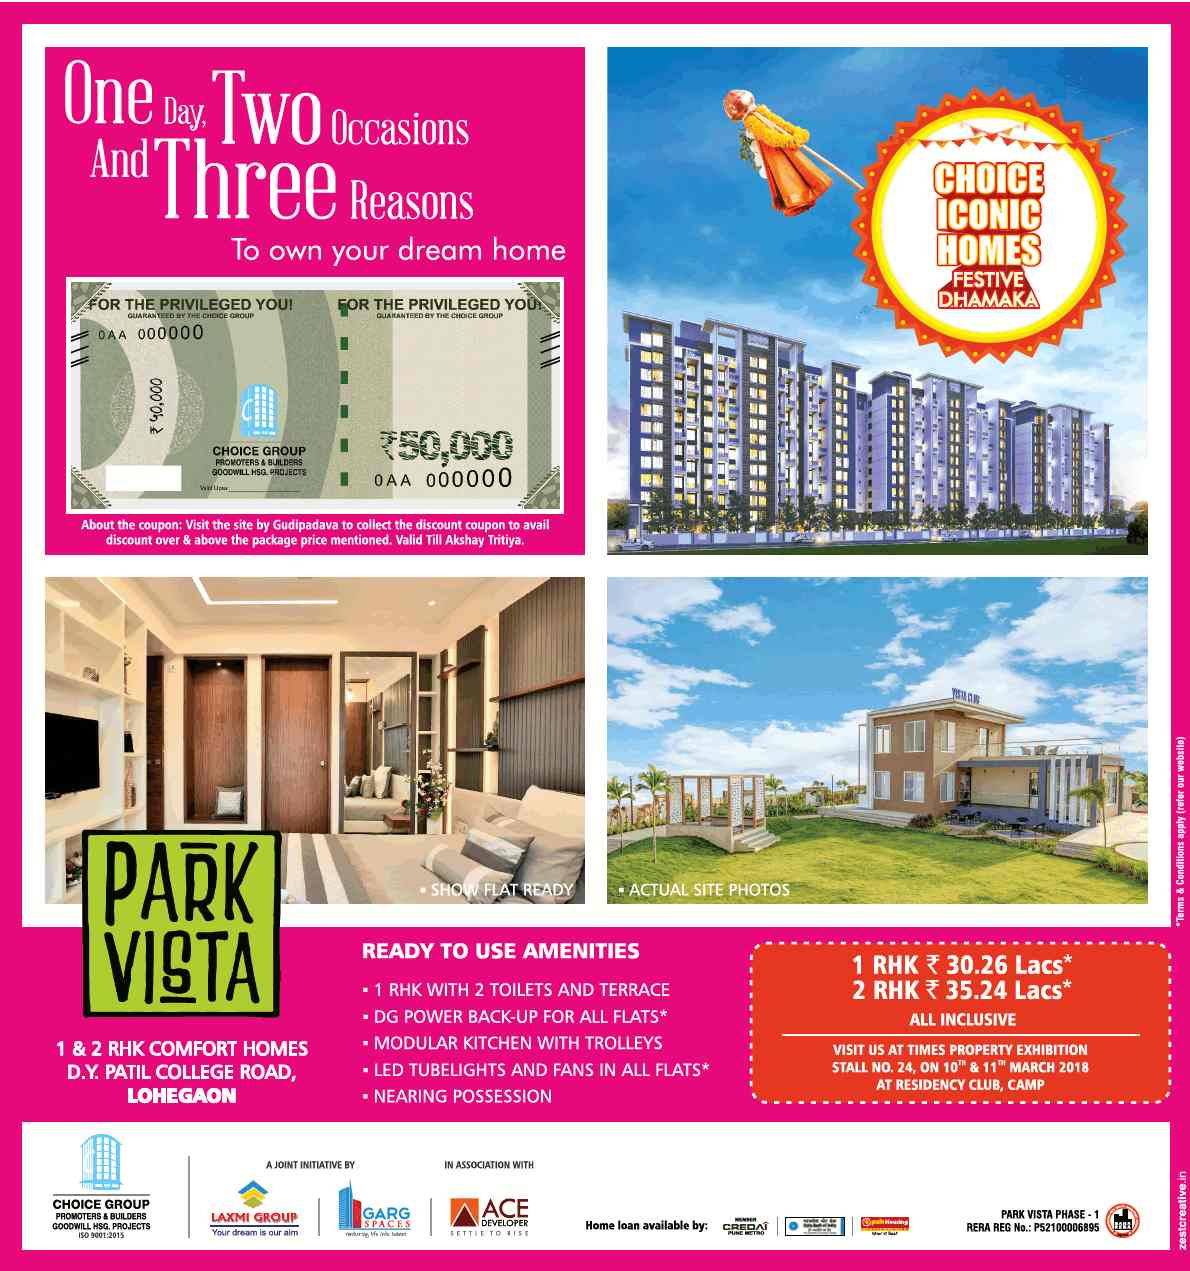 Show flats are ready at Choice Park Vista in Pune